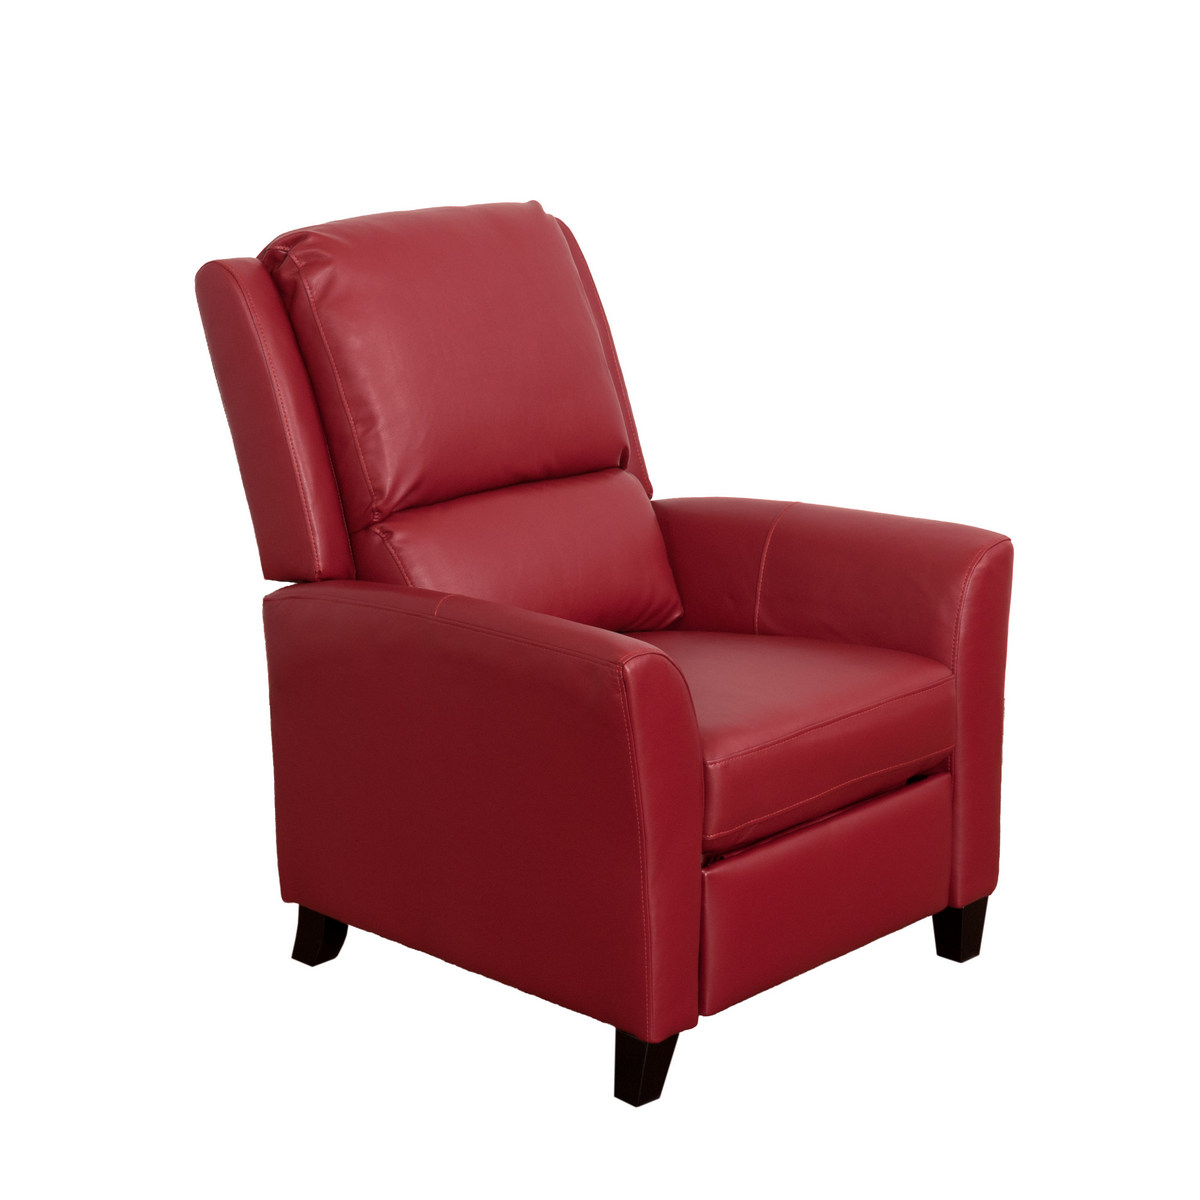 Corliving Lzy-553-r Kate Red Bonded Leather Recliner